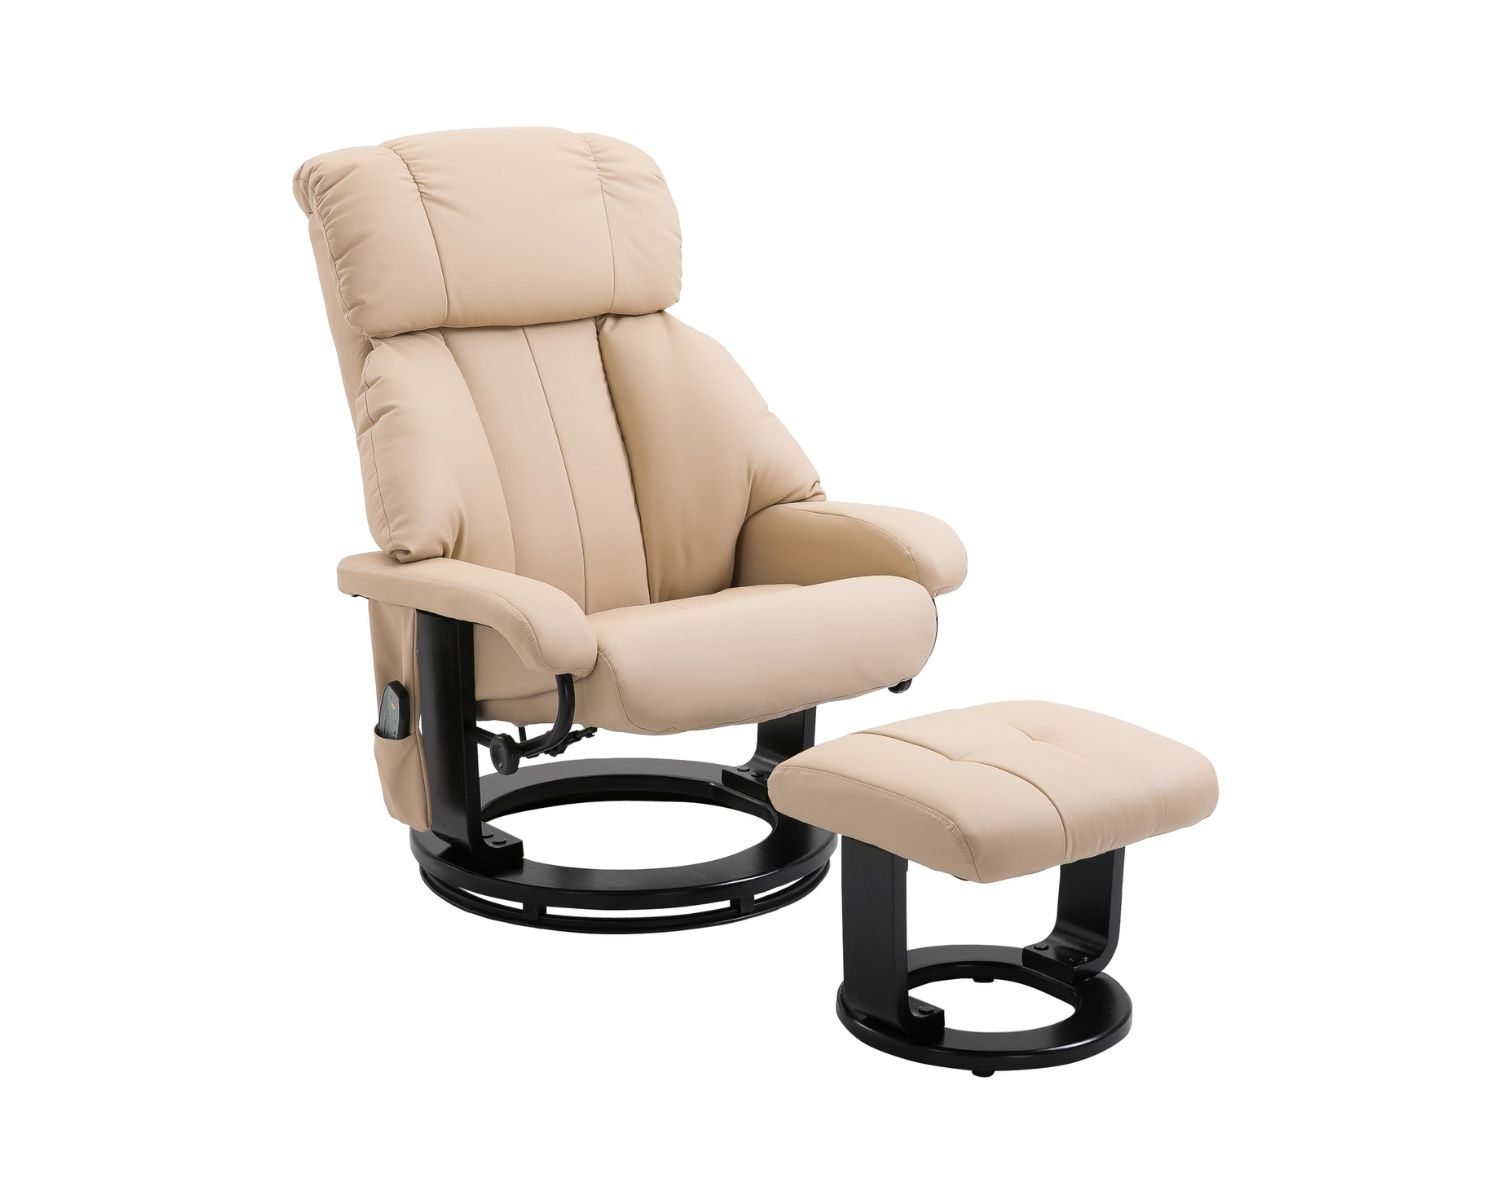 How To Stop Swivel Recliner From Turning